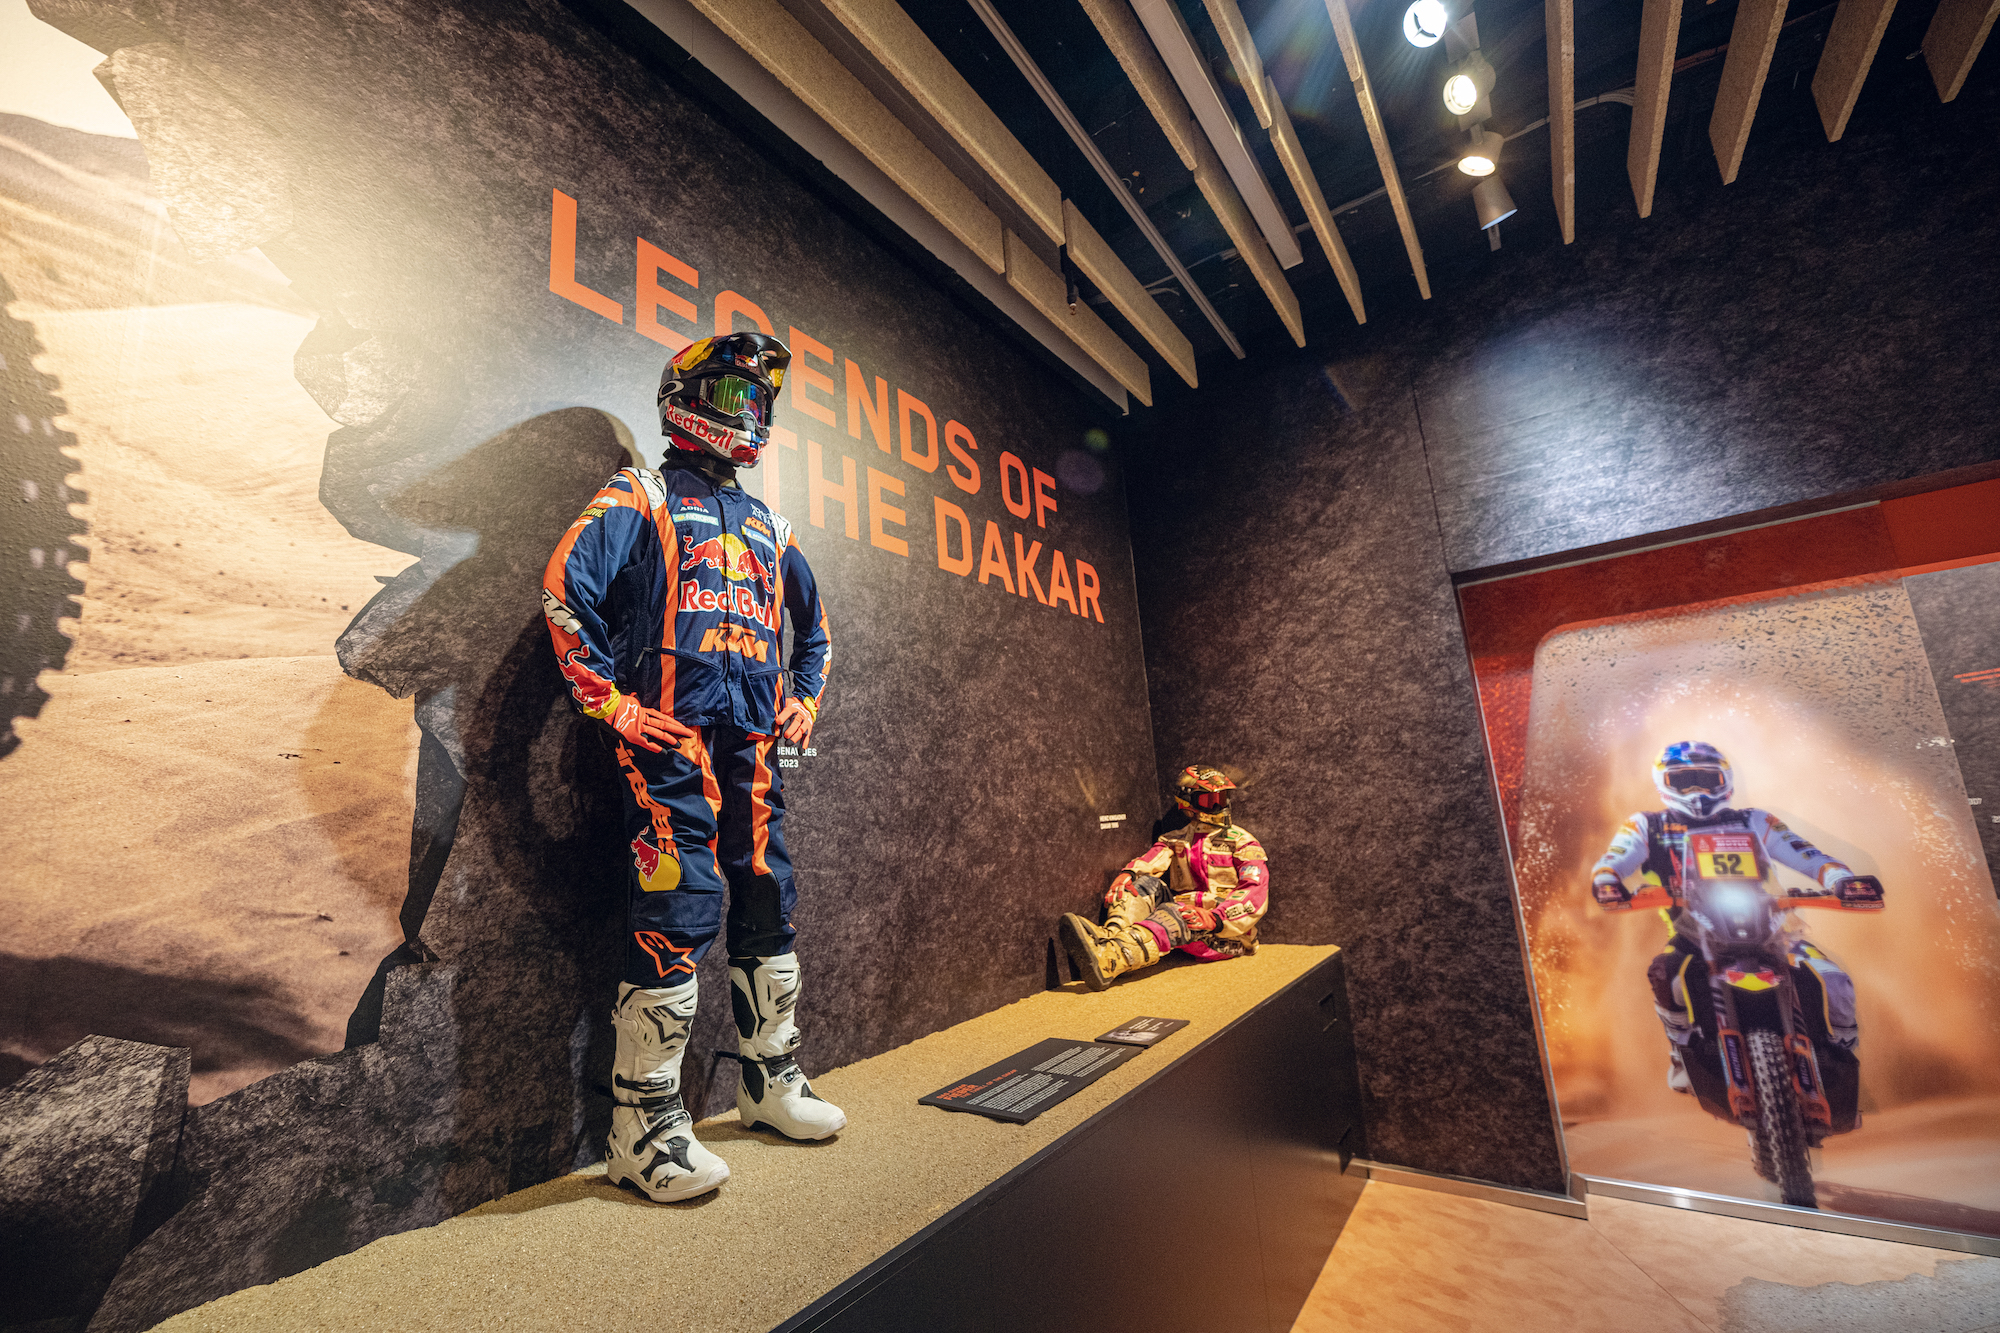 A view of the Legends of the Dakar Exhibition, hosted by KTM Motohall. Media sourced from KTM.